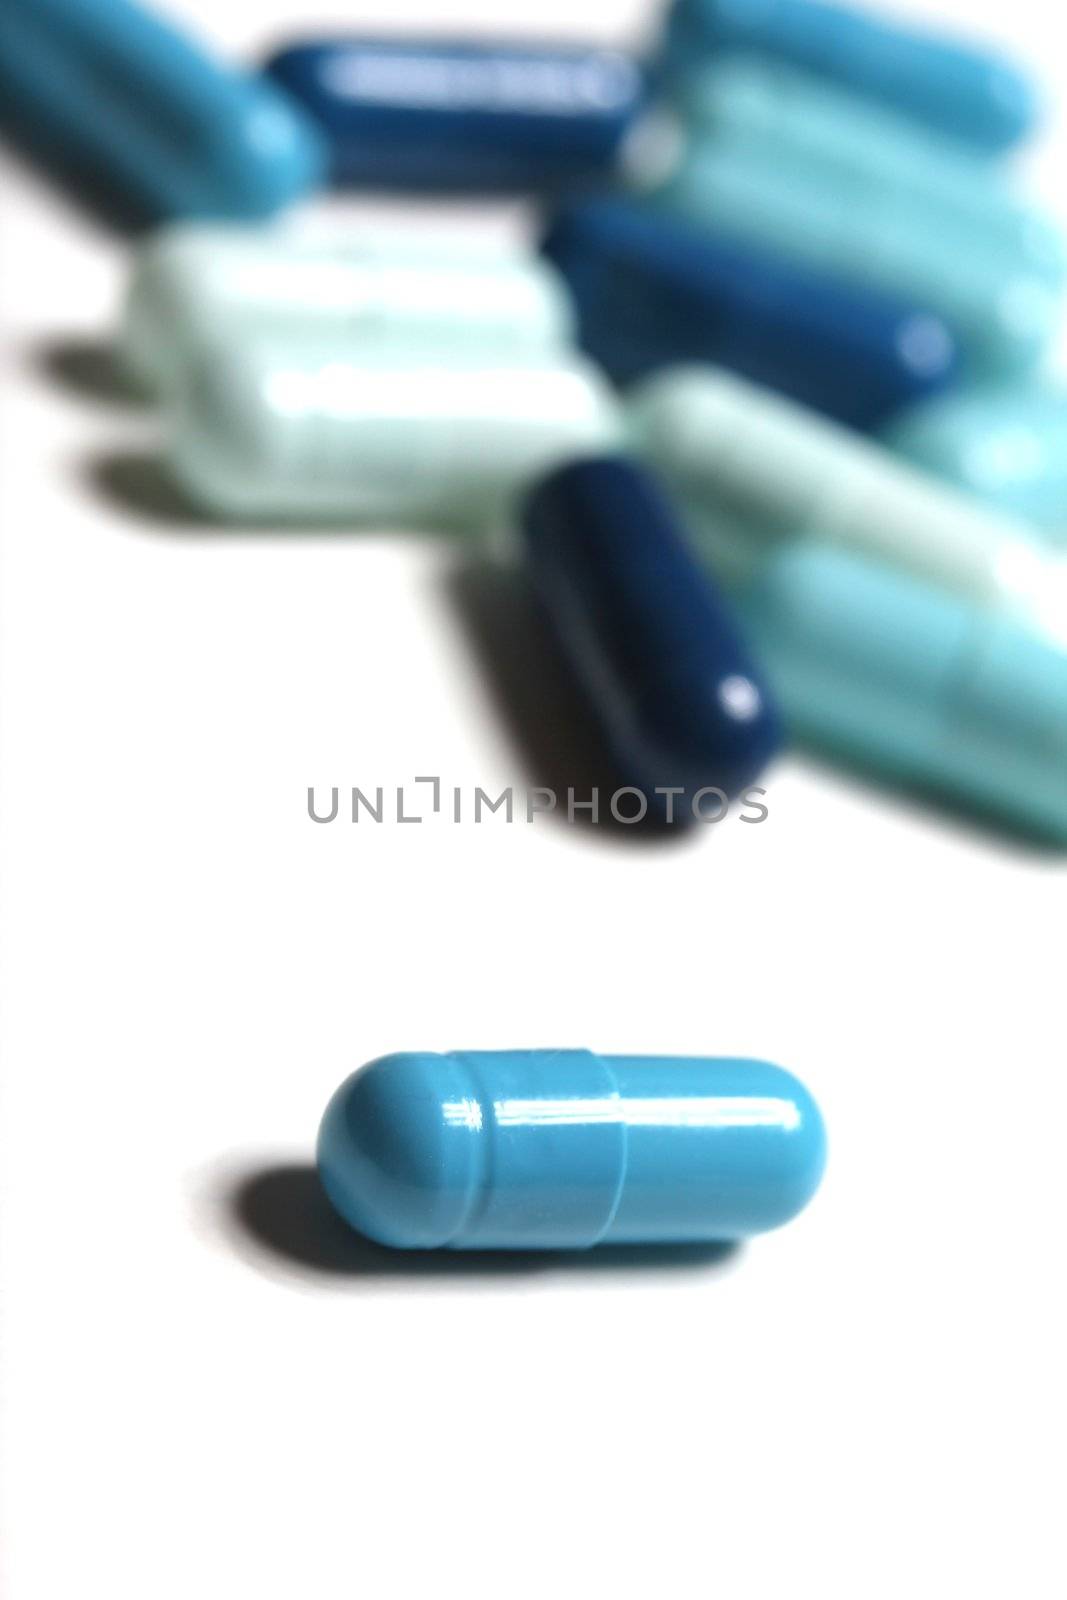 colored isolated medicinical capsules by Teka77